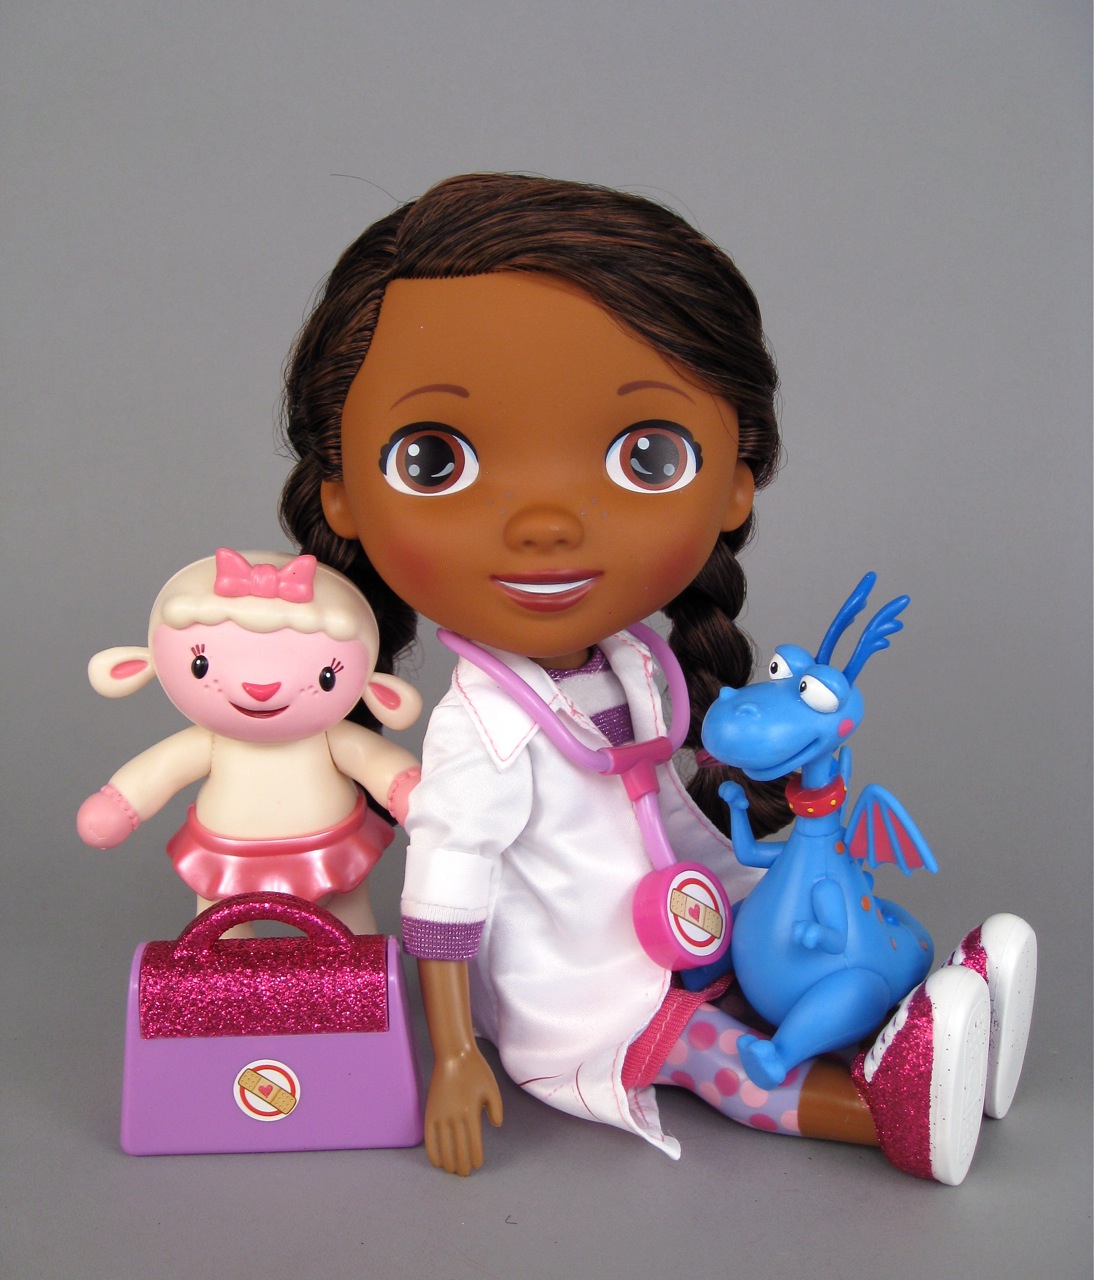 Doc McStuffins doll by Just Play